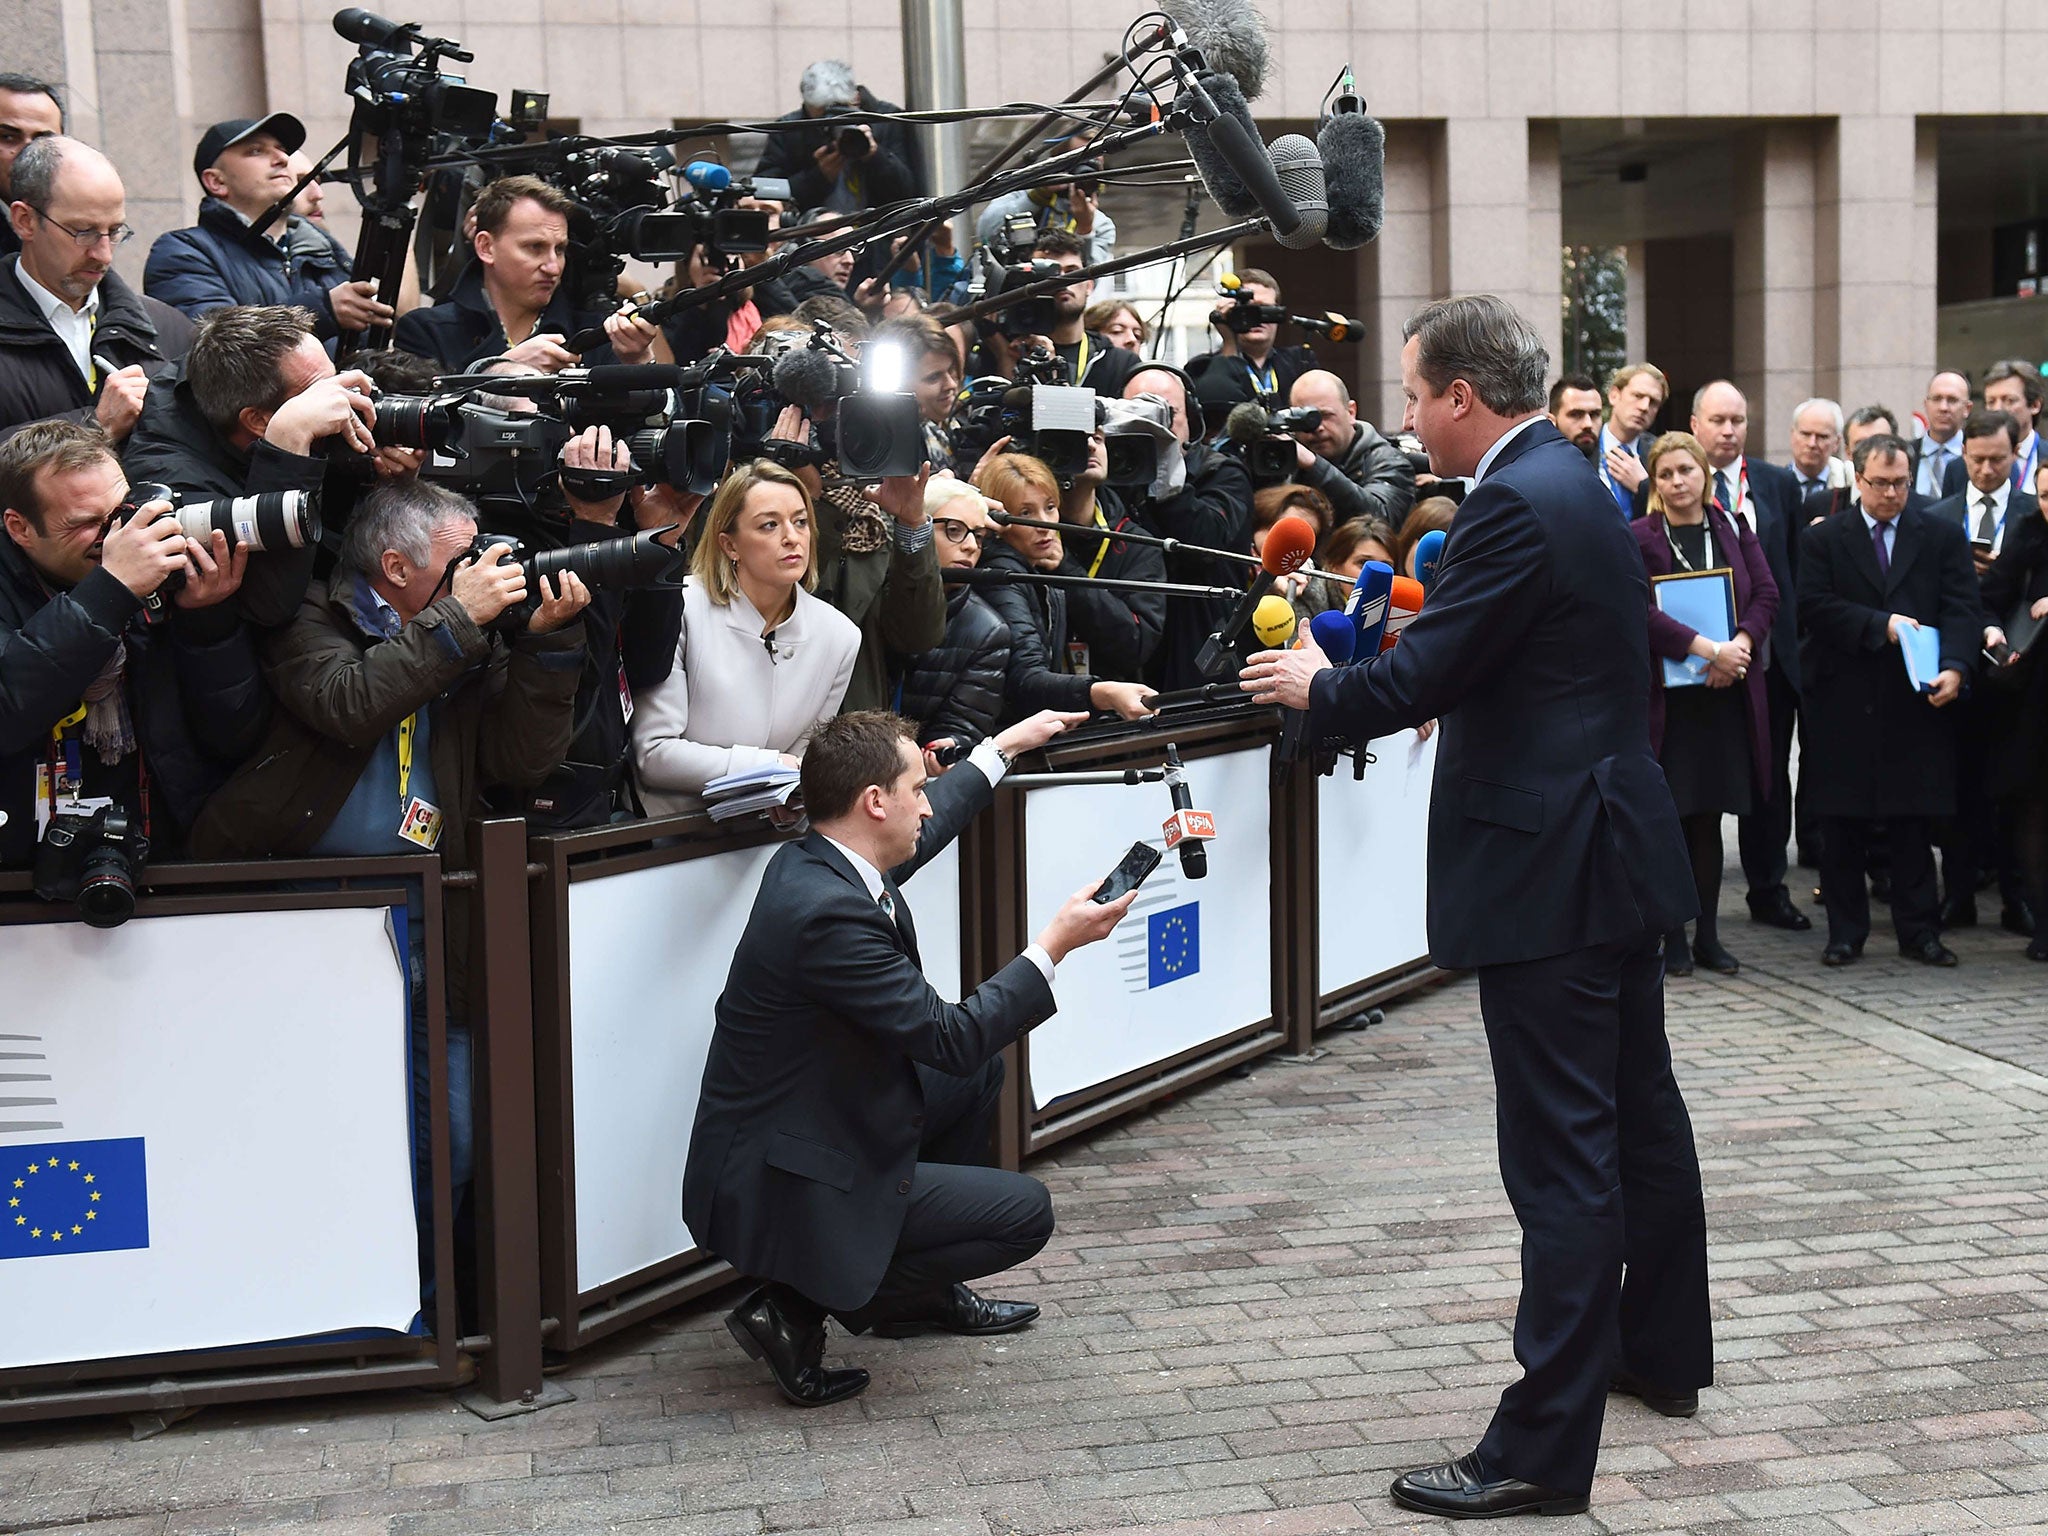 Britain's Prime minister David Cameron speaks to the media as he arrives at the European Council in Brussels